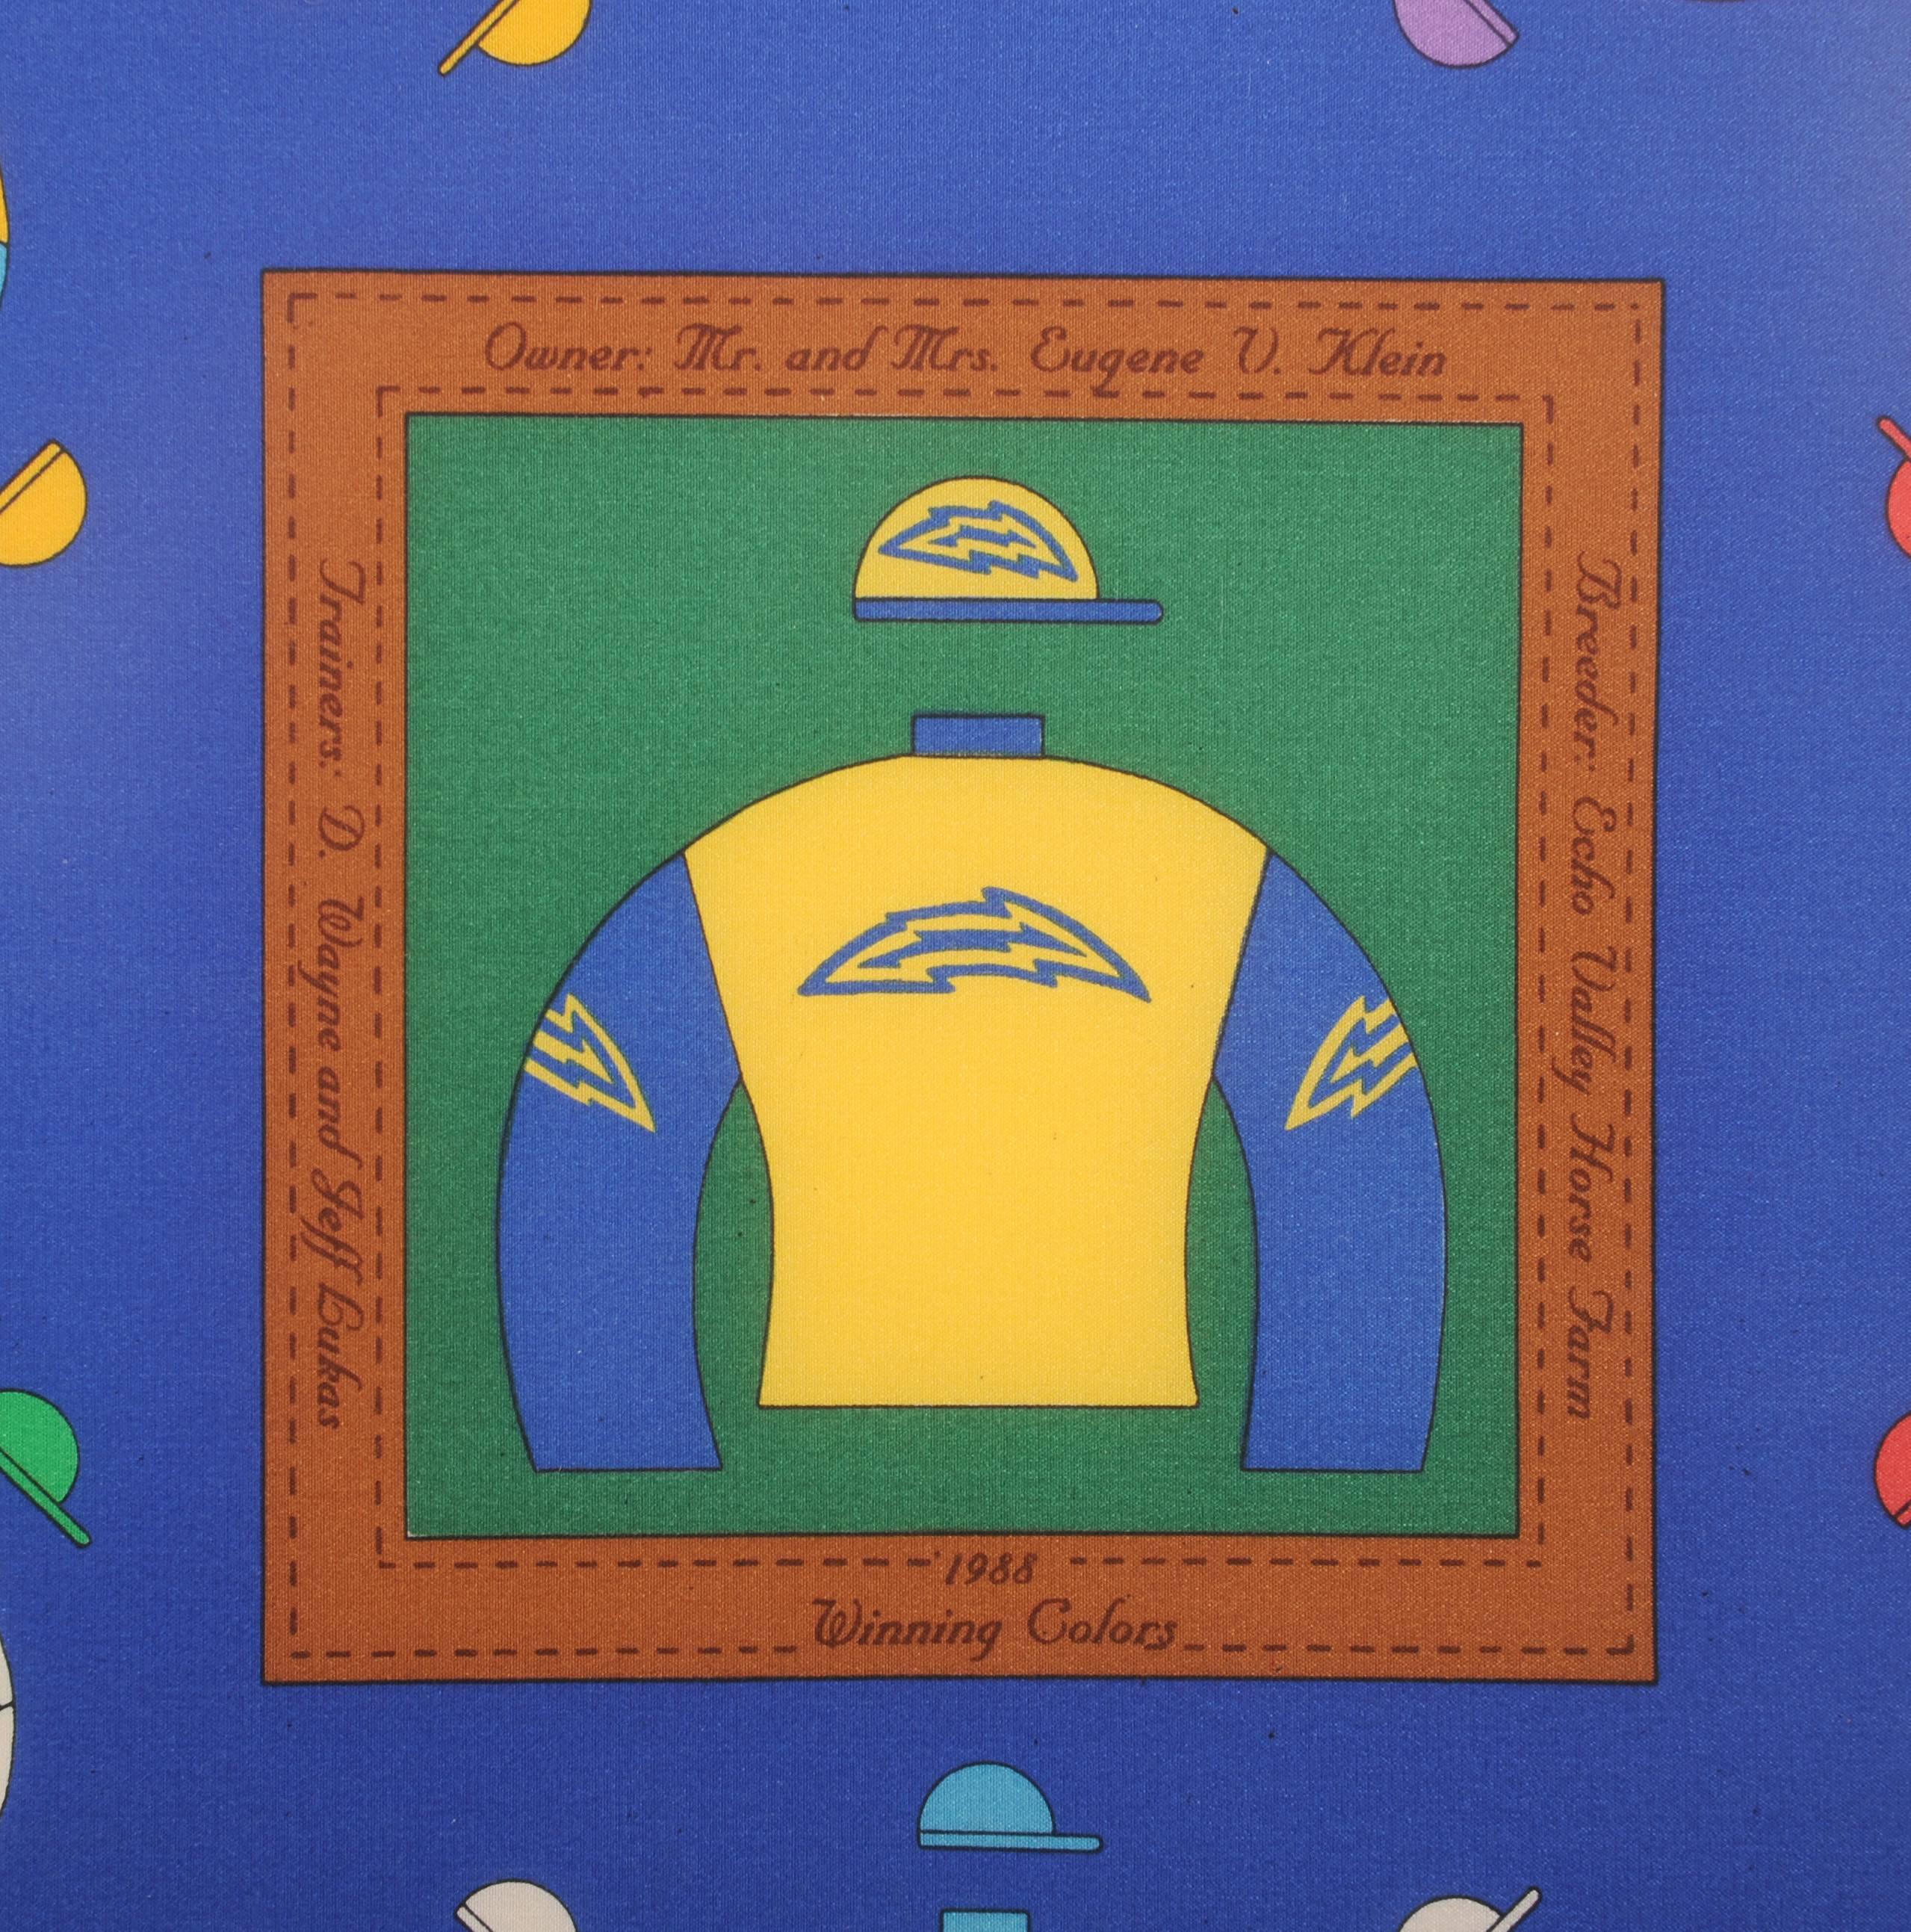 The center square depicts colorful racing silks of the 1988 Derby Winner Winning Colors. This is surrounded by jockey silks from all of the winners from 1875 until 1987 set against a blue background and the green border.  The four corners depict